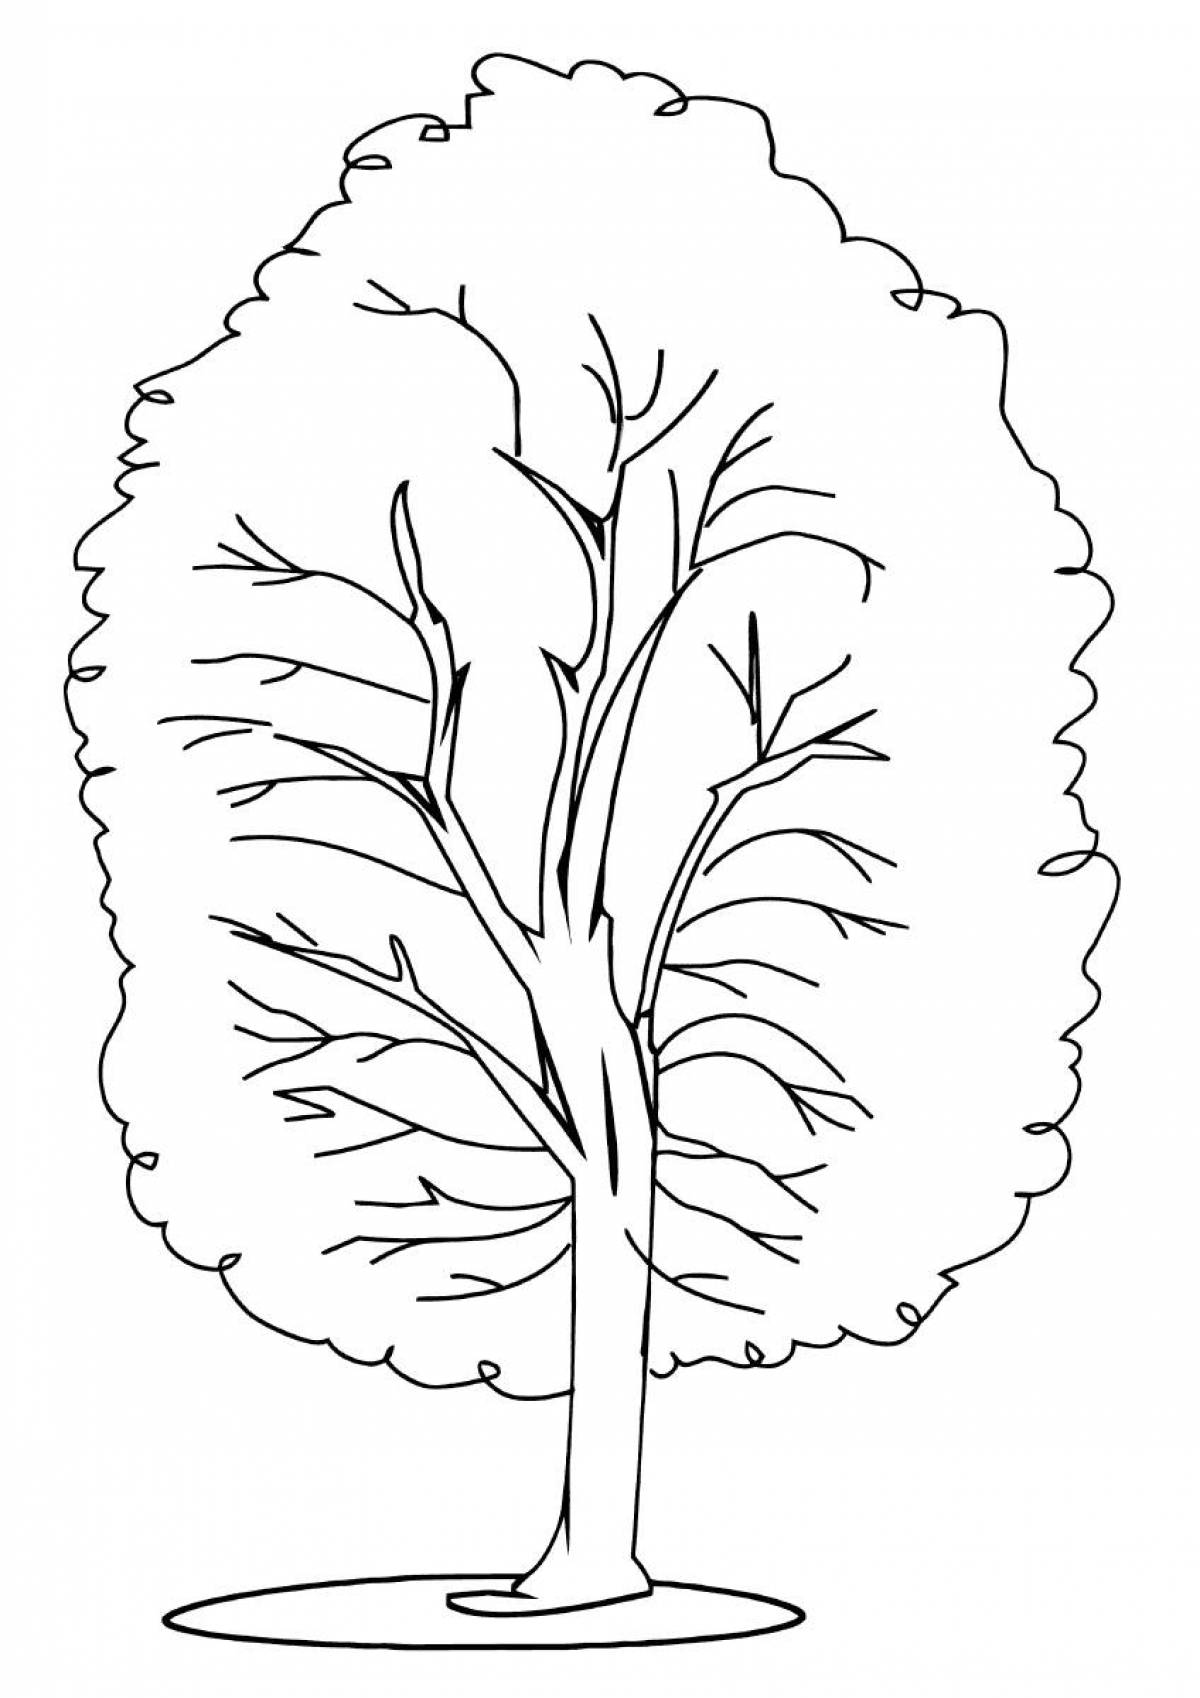 Linden coloring page